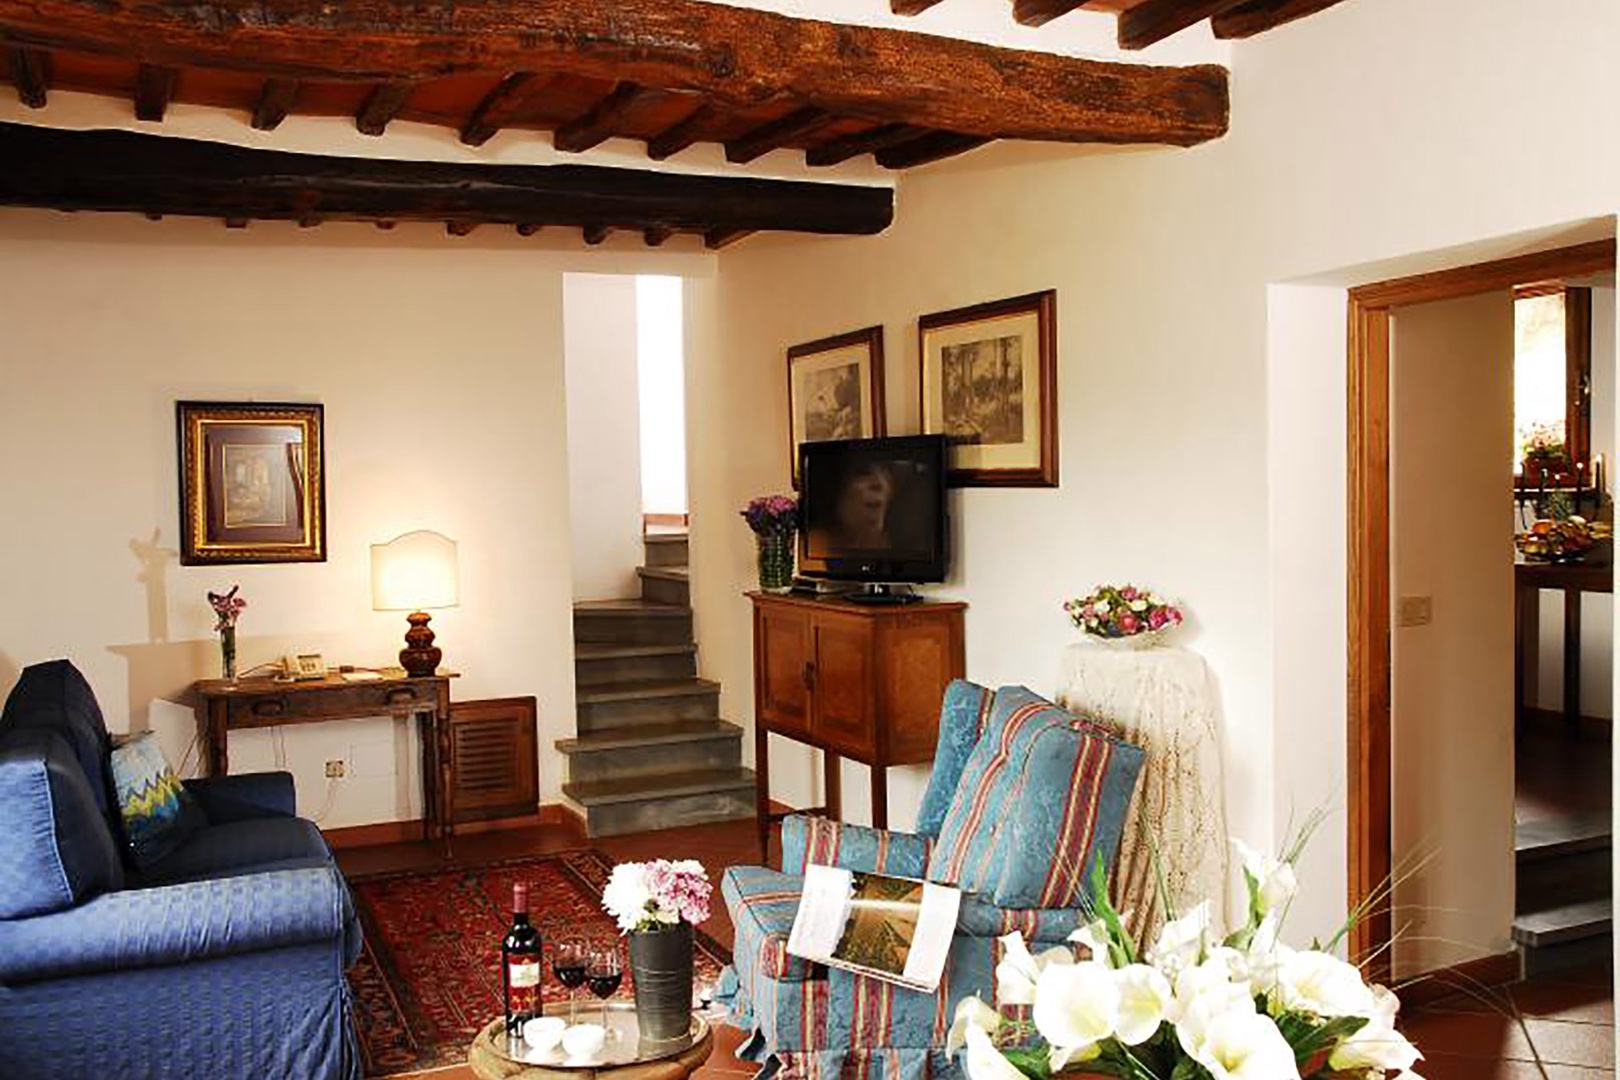 Living and dining room area of Bucine Cotogno.